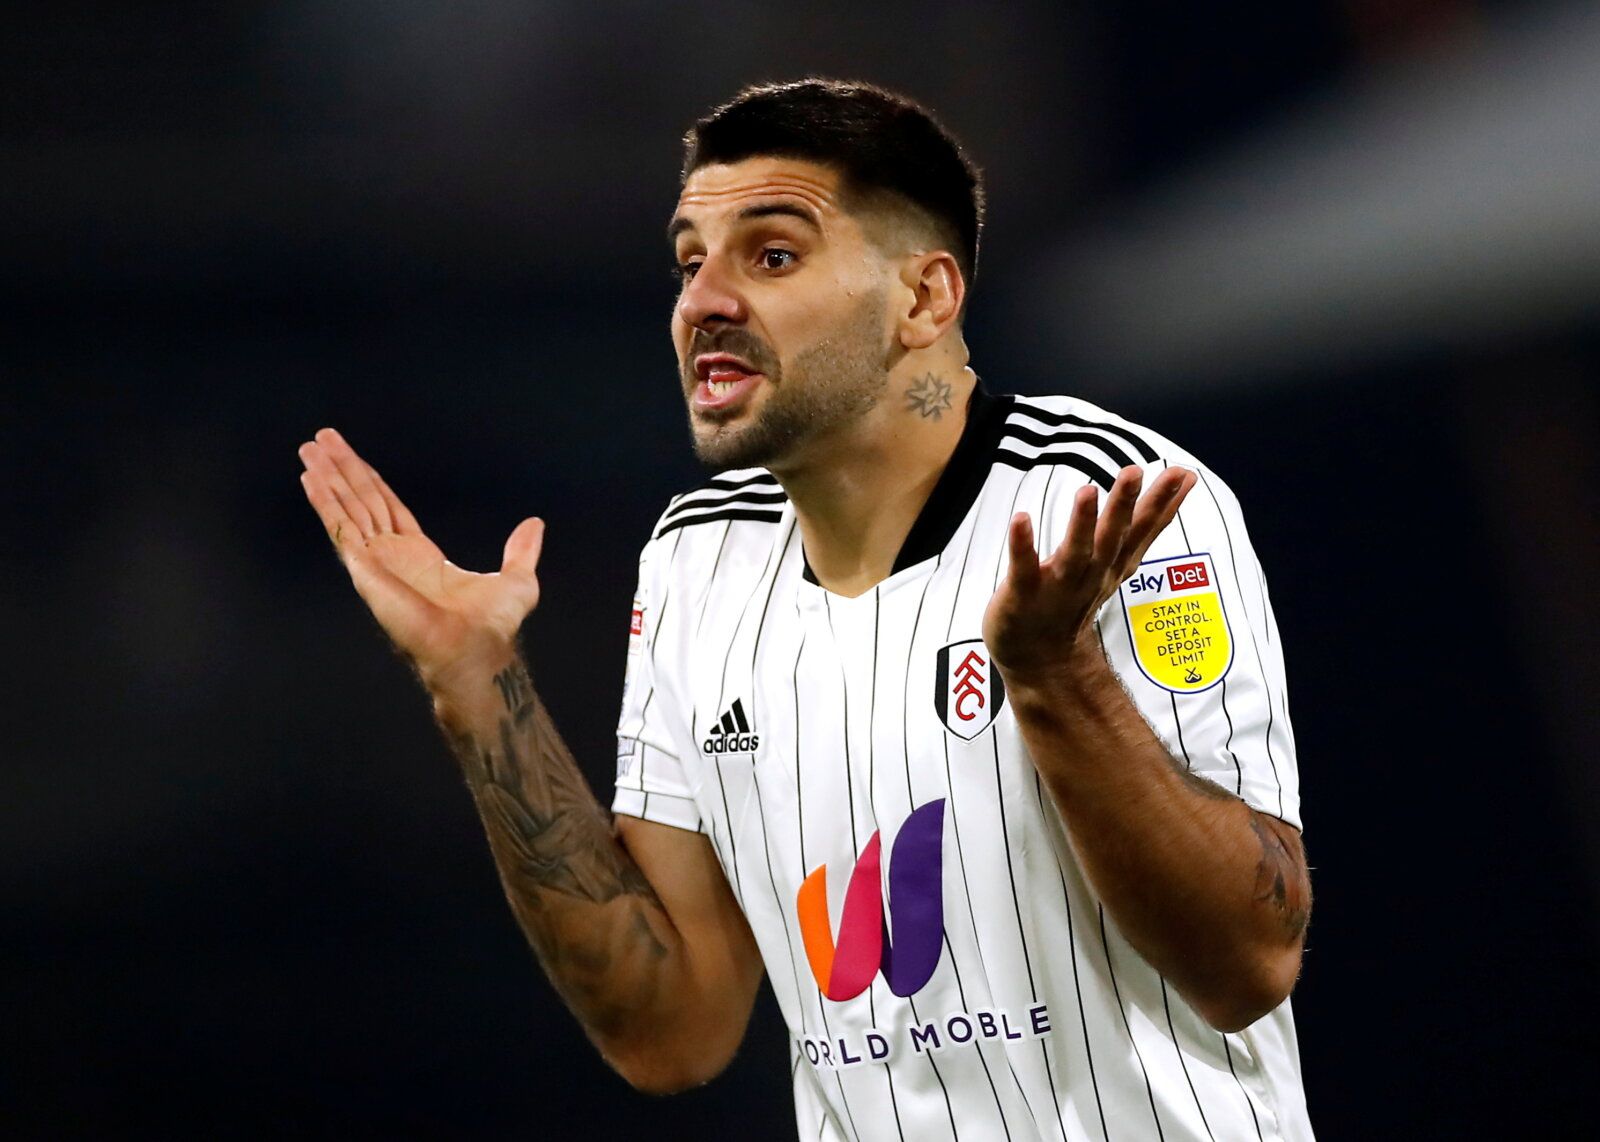 Soccer Football - Championship - Fulham v AFC Bournemouth - Craven Cottage, London, Britain - December 3, 2021 Fulham's Aleksandar Mitrovic reacts Action Images/Andrew Boyers  EDITORIAL USE ONLY. No use with unauthorized audio, video, data, fixture lists, club/league logos or 